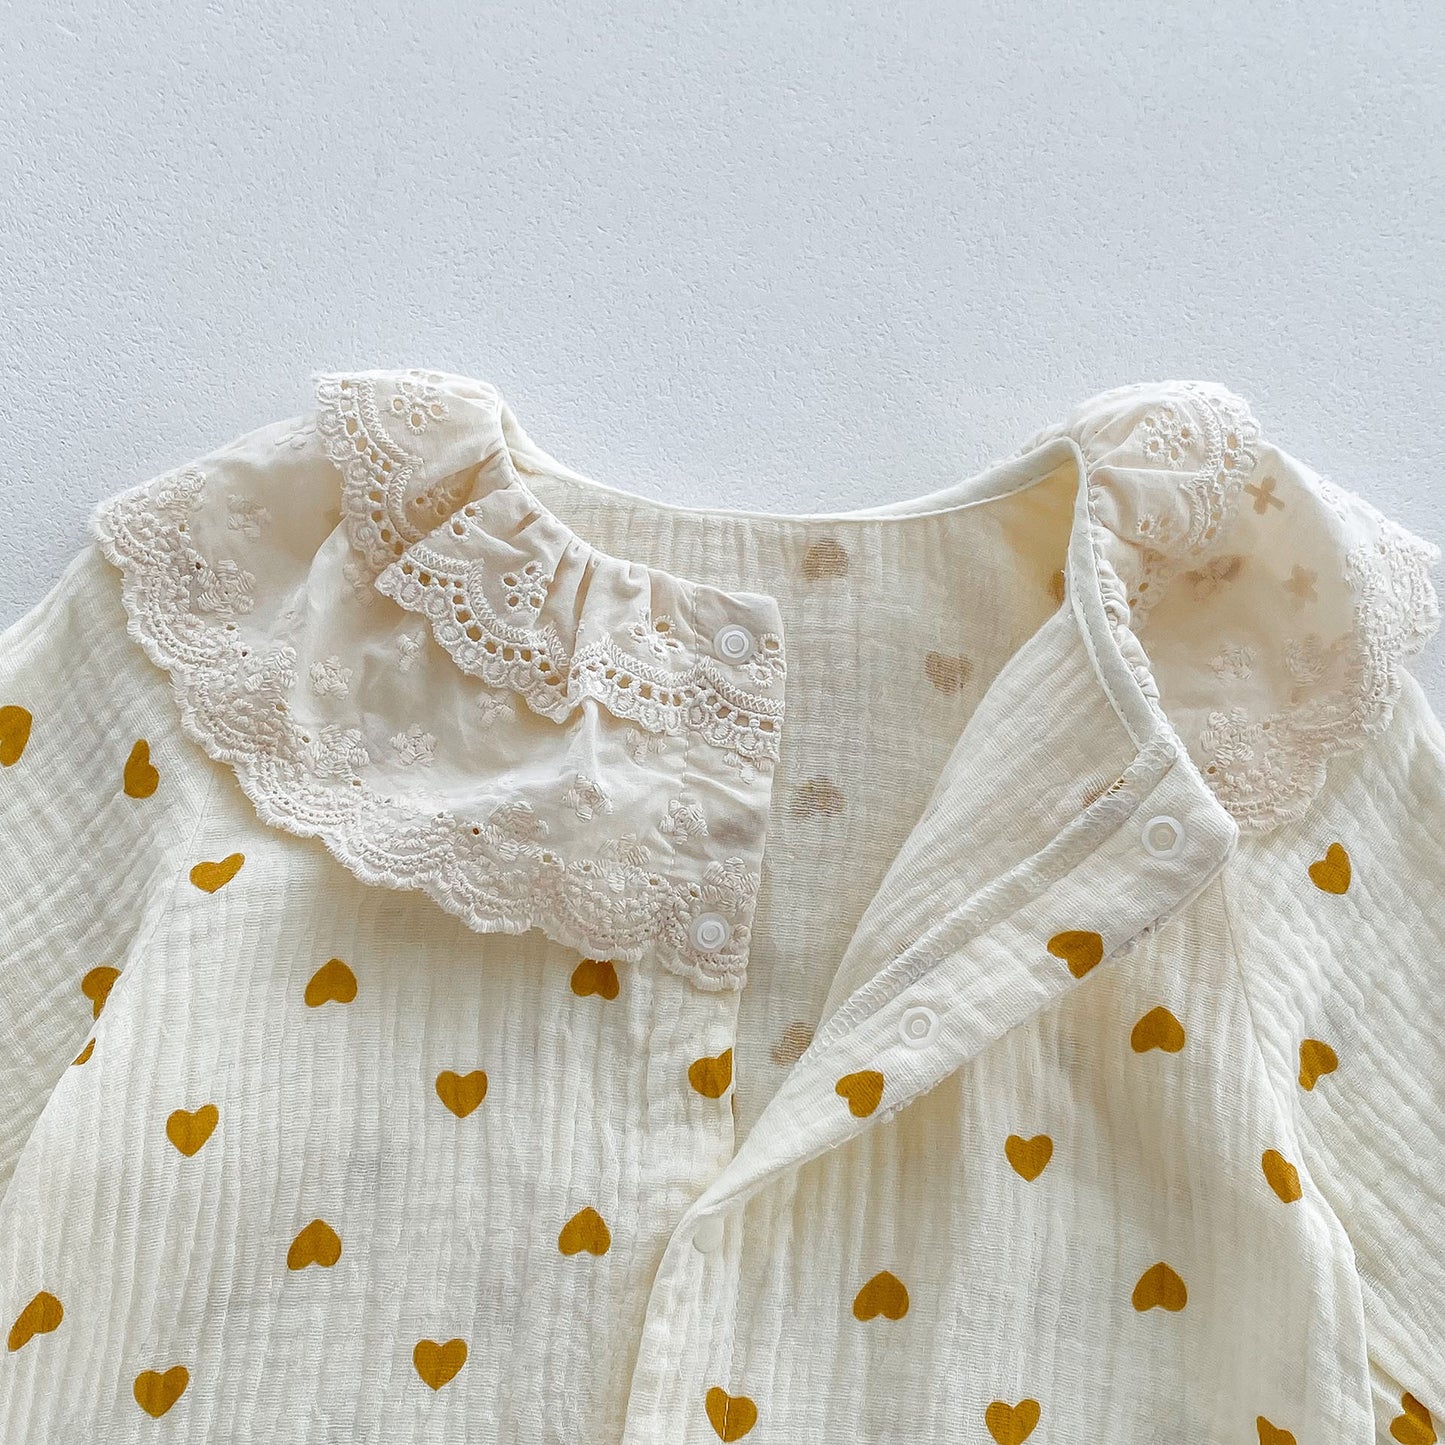 New Arrival Baby Heart Pattern Romper For Girls With Lace Collar